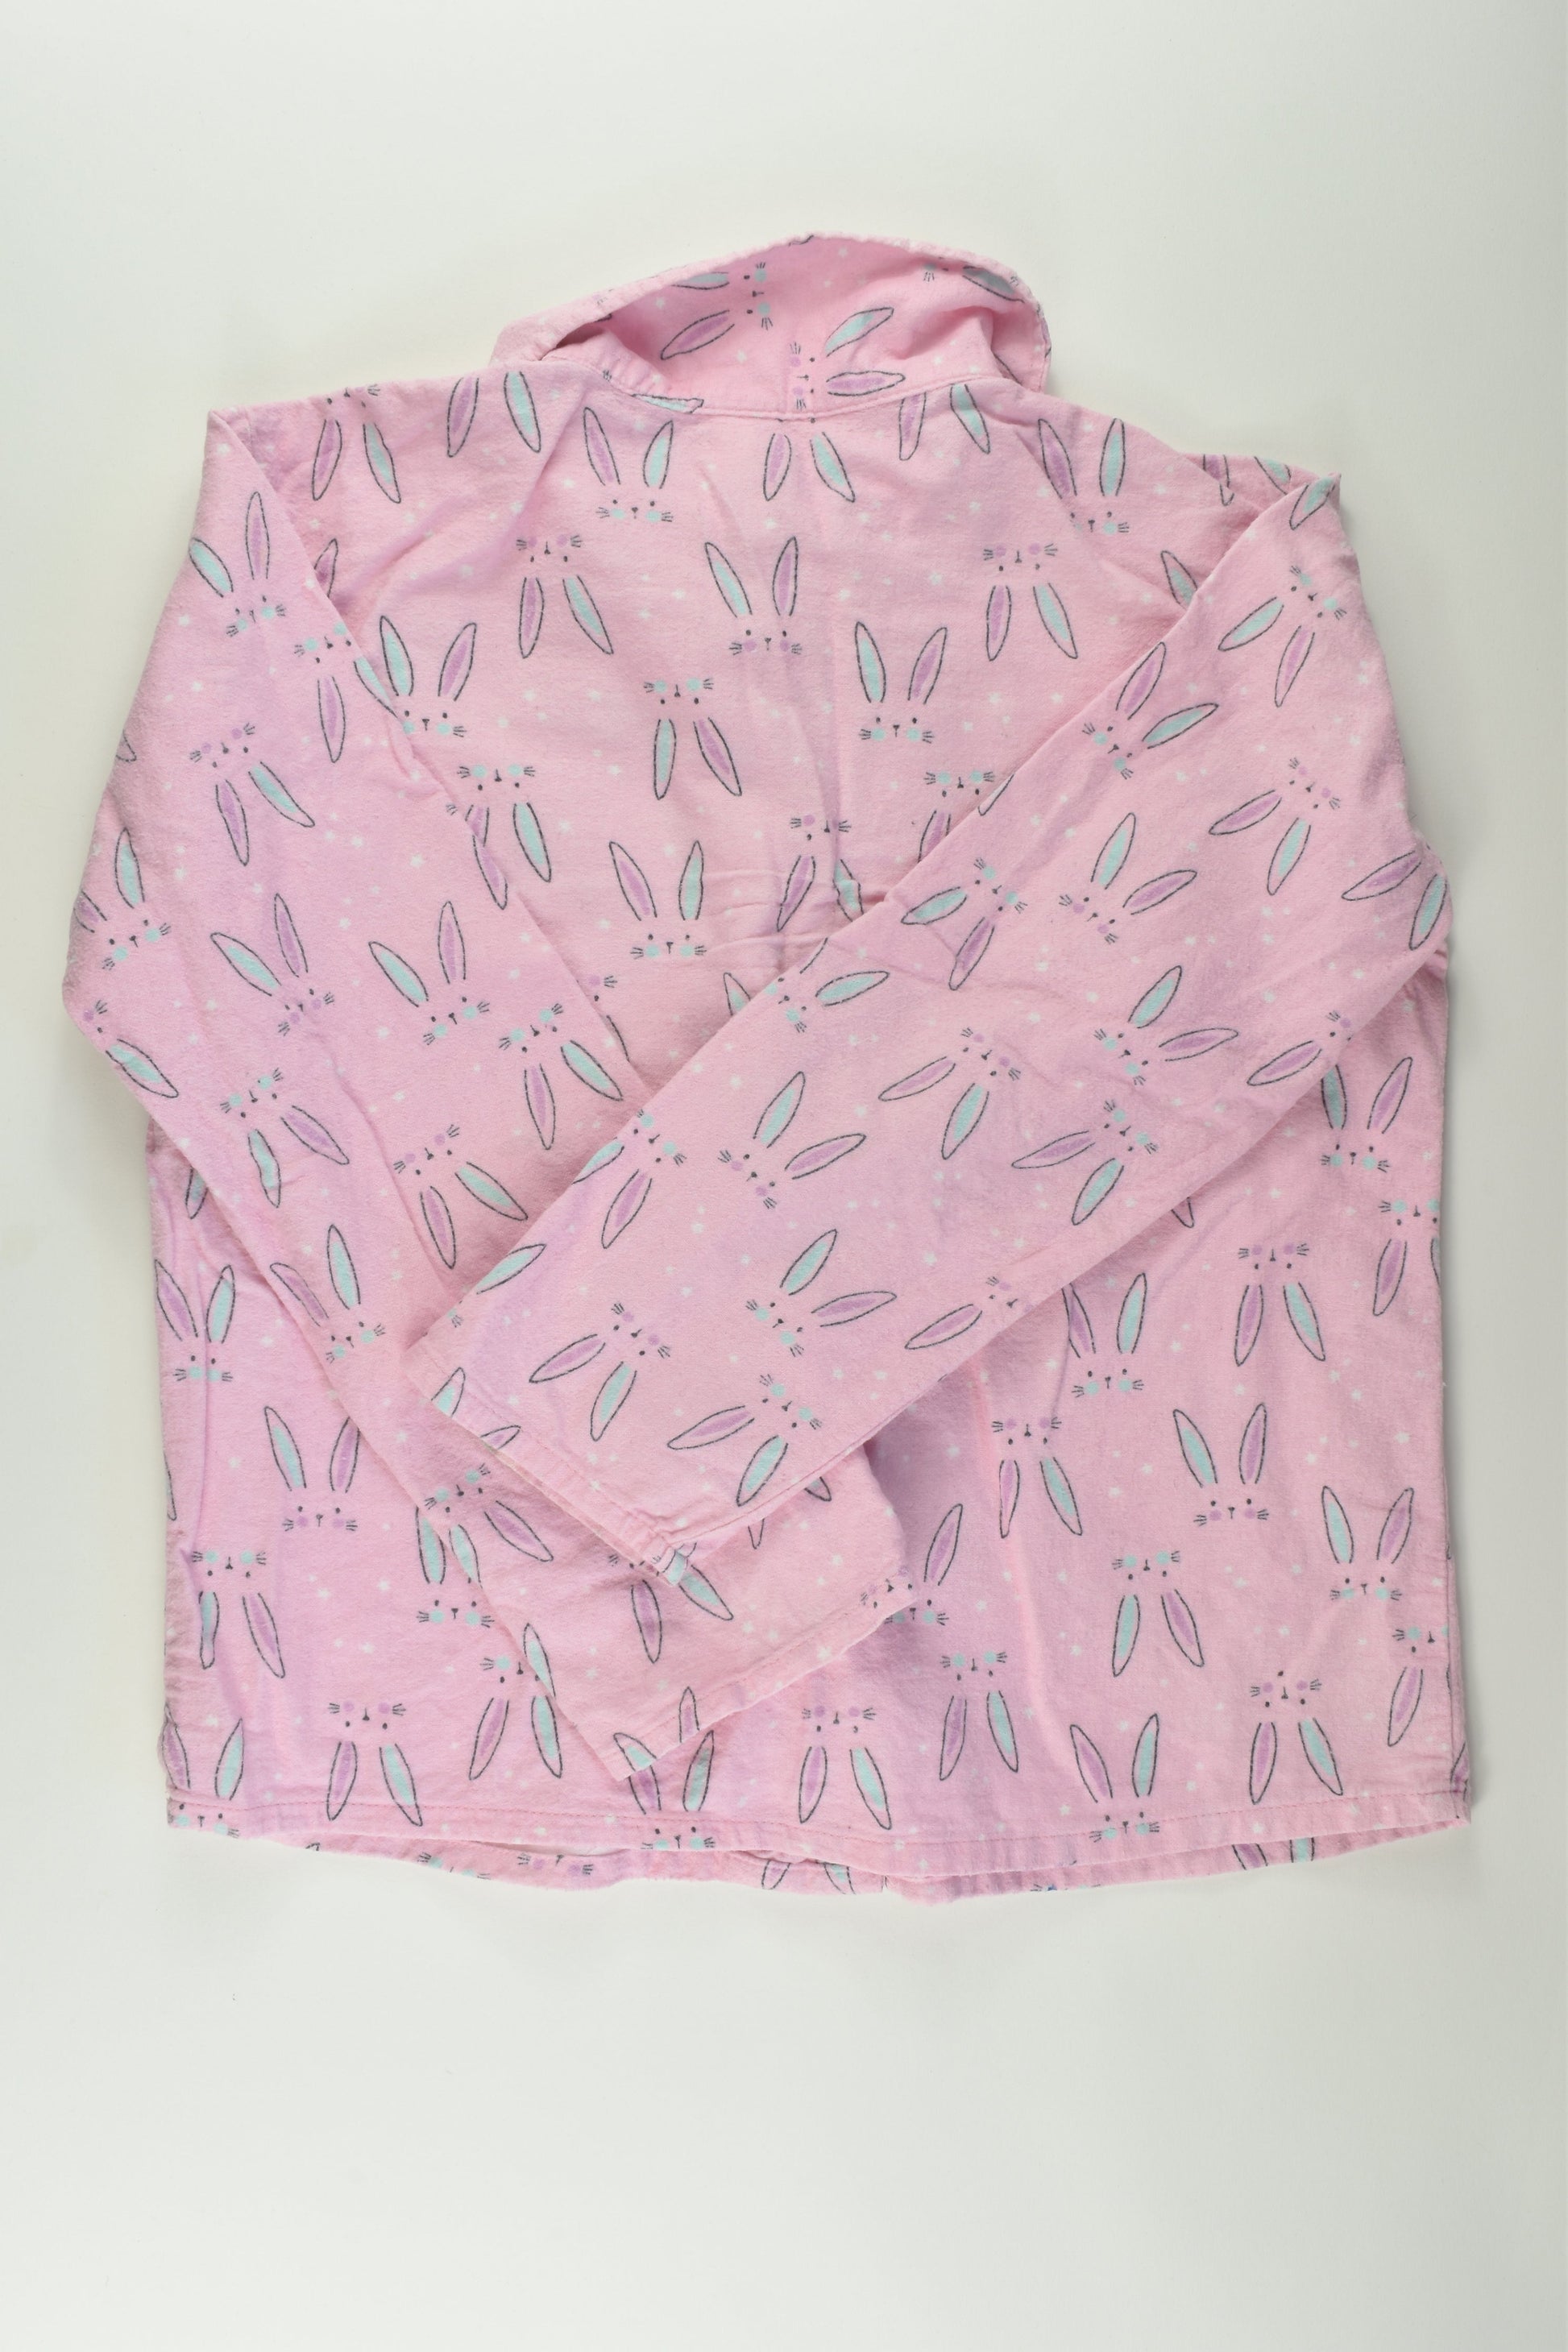 Kids & Co Size 10 Bunny Flannel Shirt